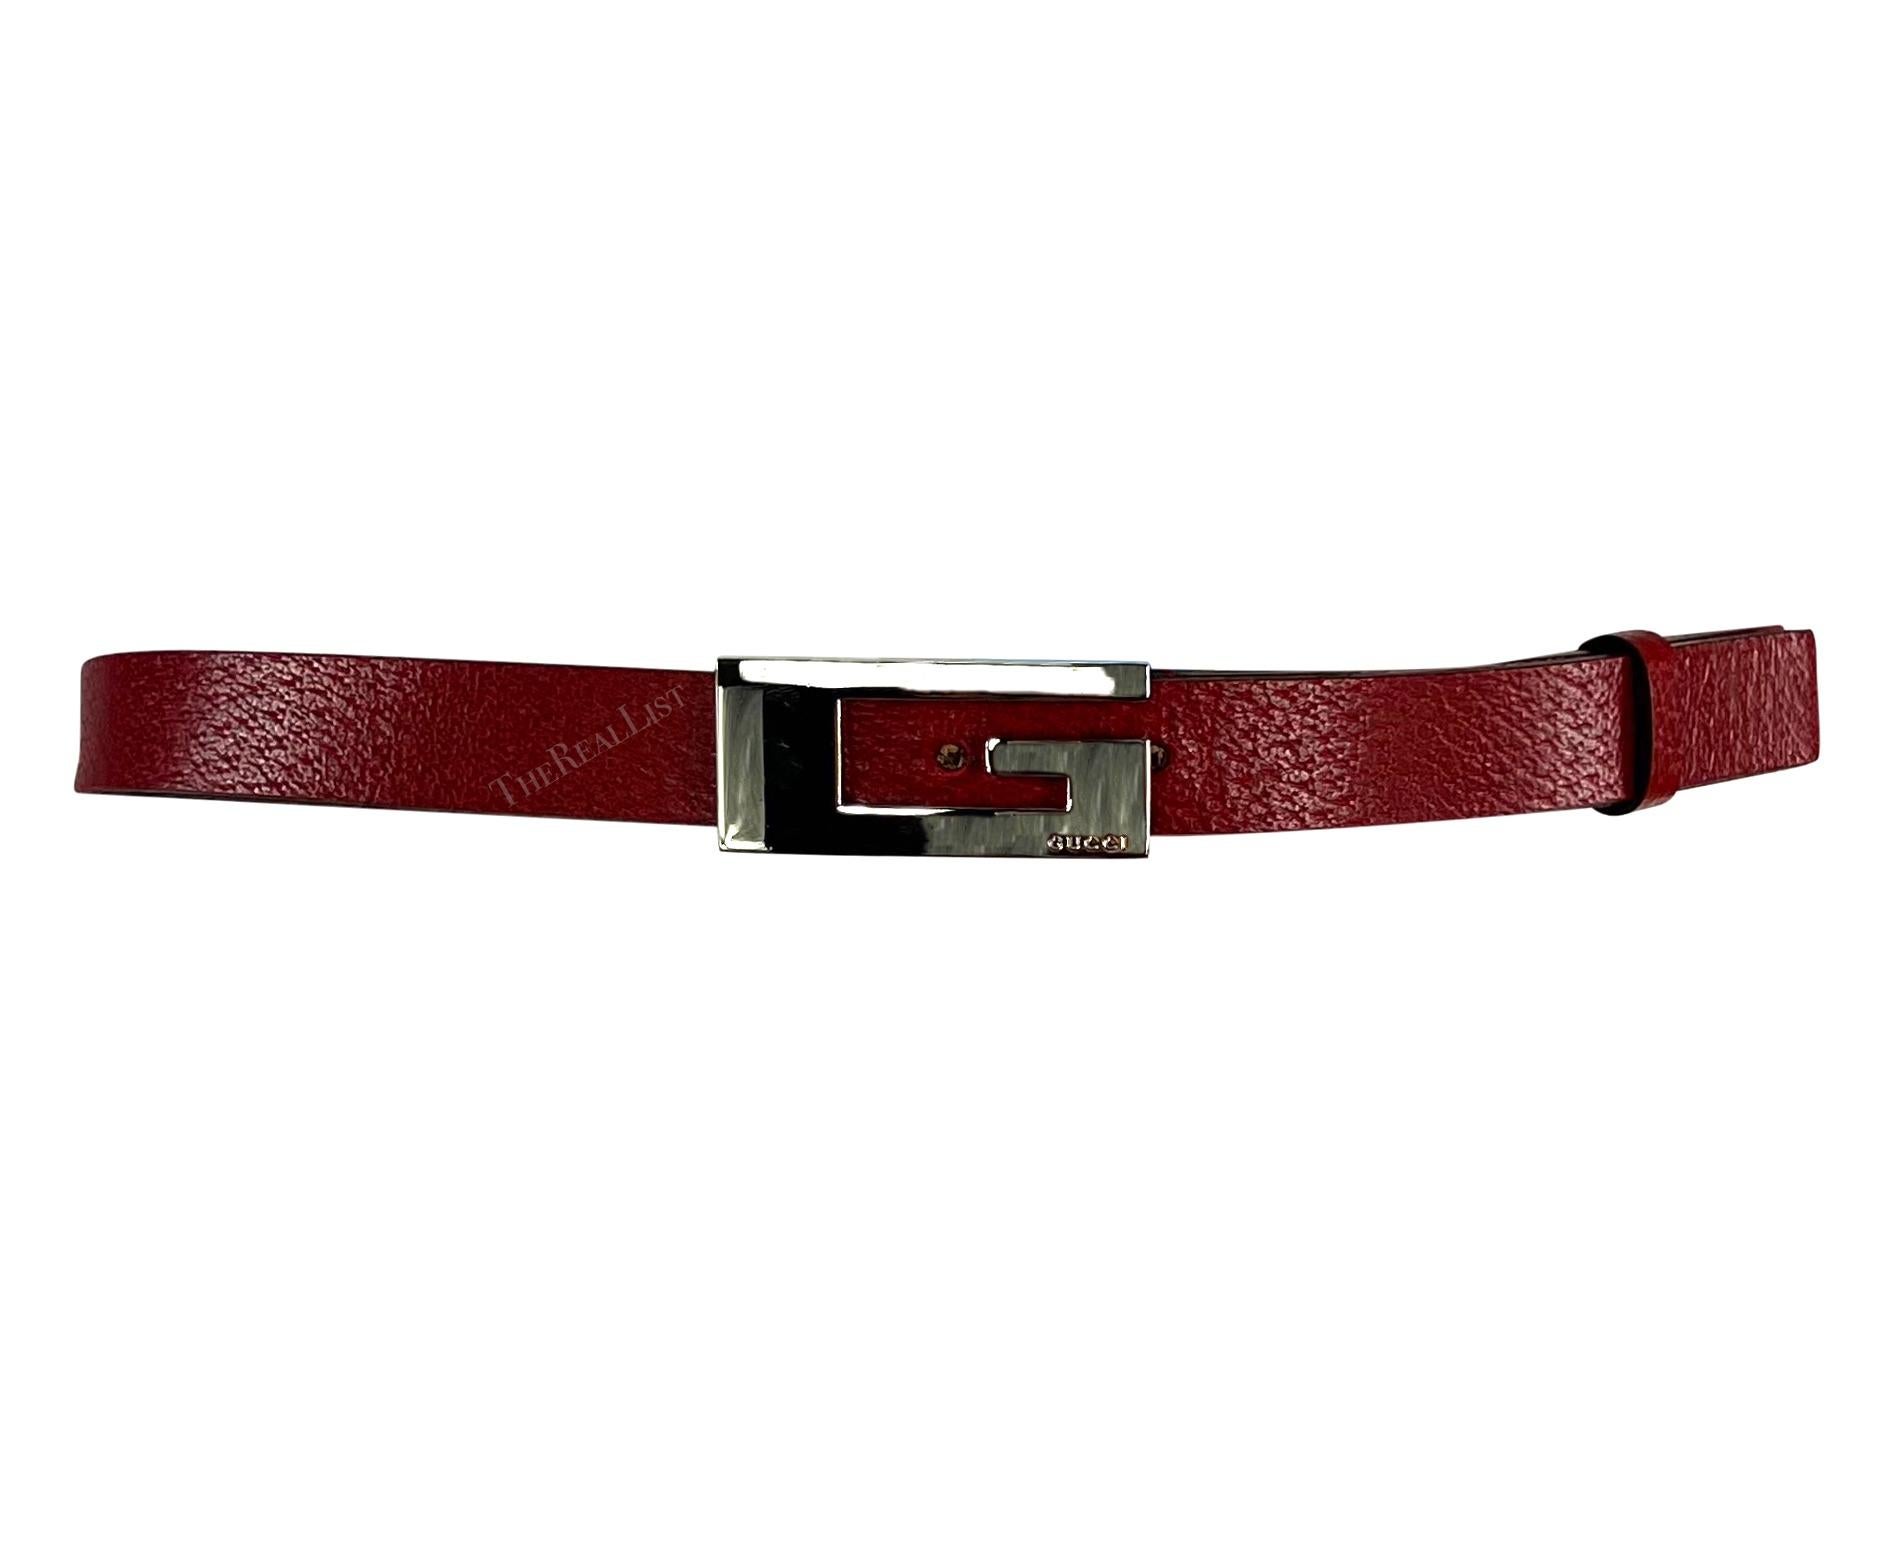 From the Spring/Summer 1998 collection, this thin leather Gucci belt was designed by Tom Ford. It features a slender design in red leather, accentuated by a distinctive rectangular silver metal 'G' buckle at the front. 

Approximate measurements: